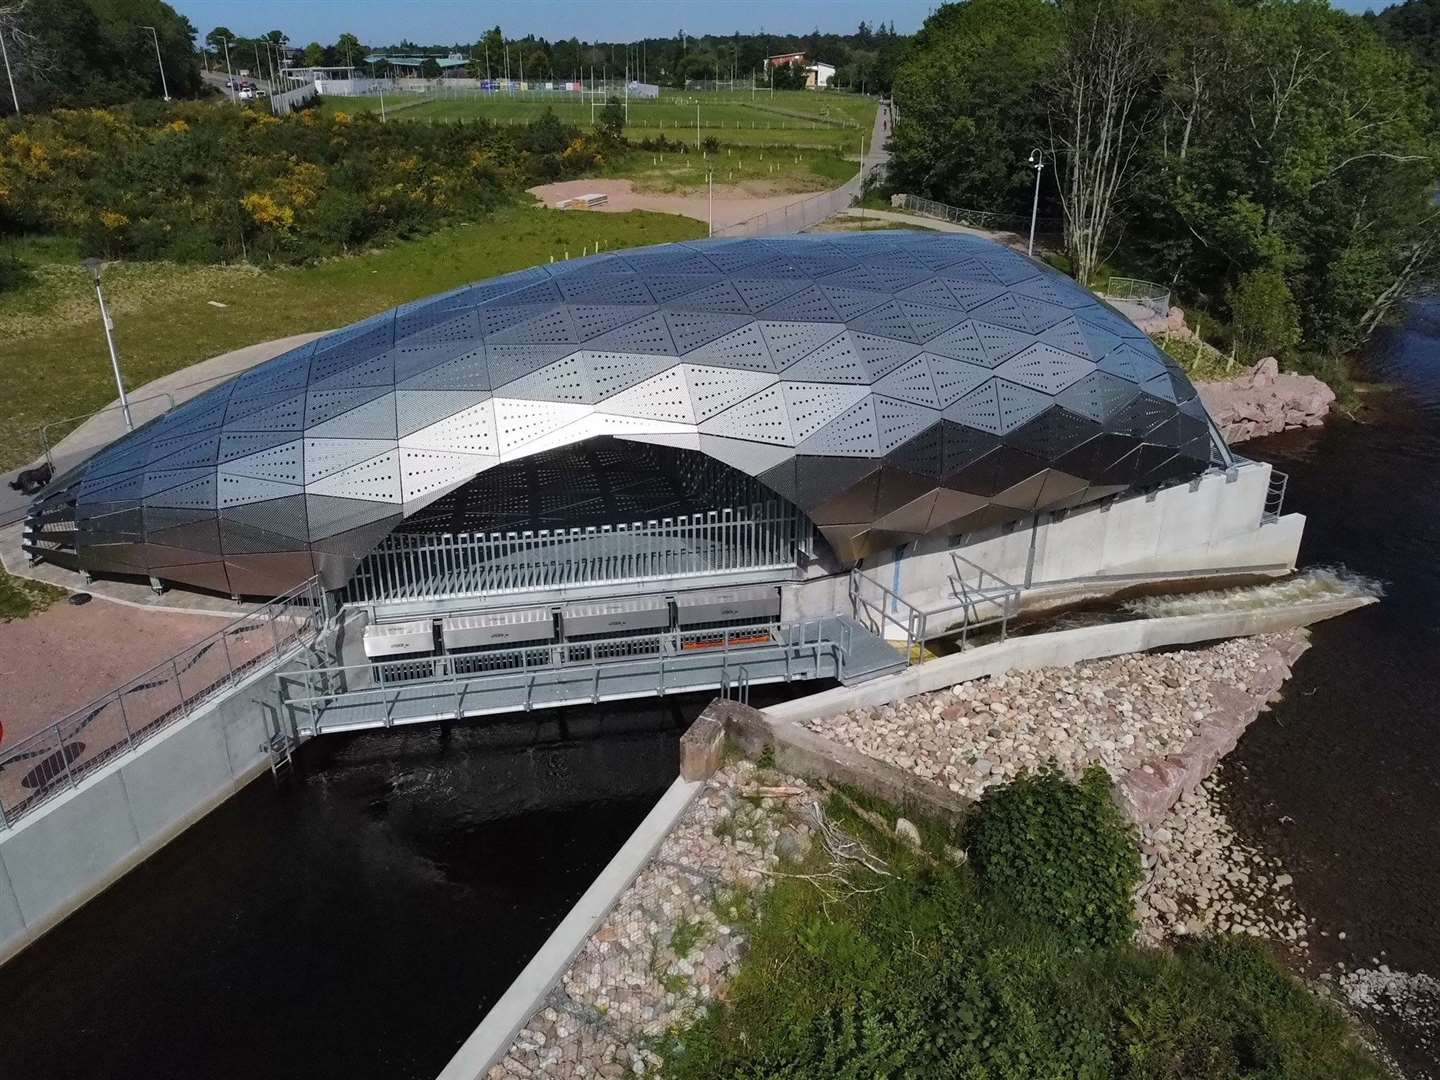 The Hydro Ness building.